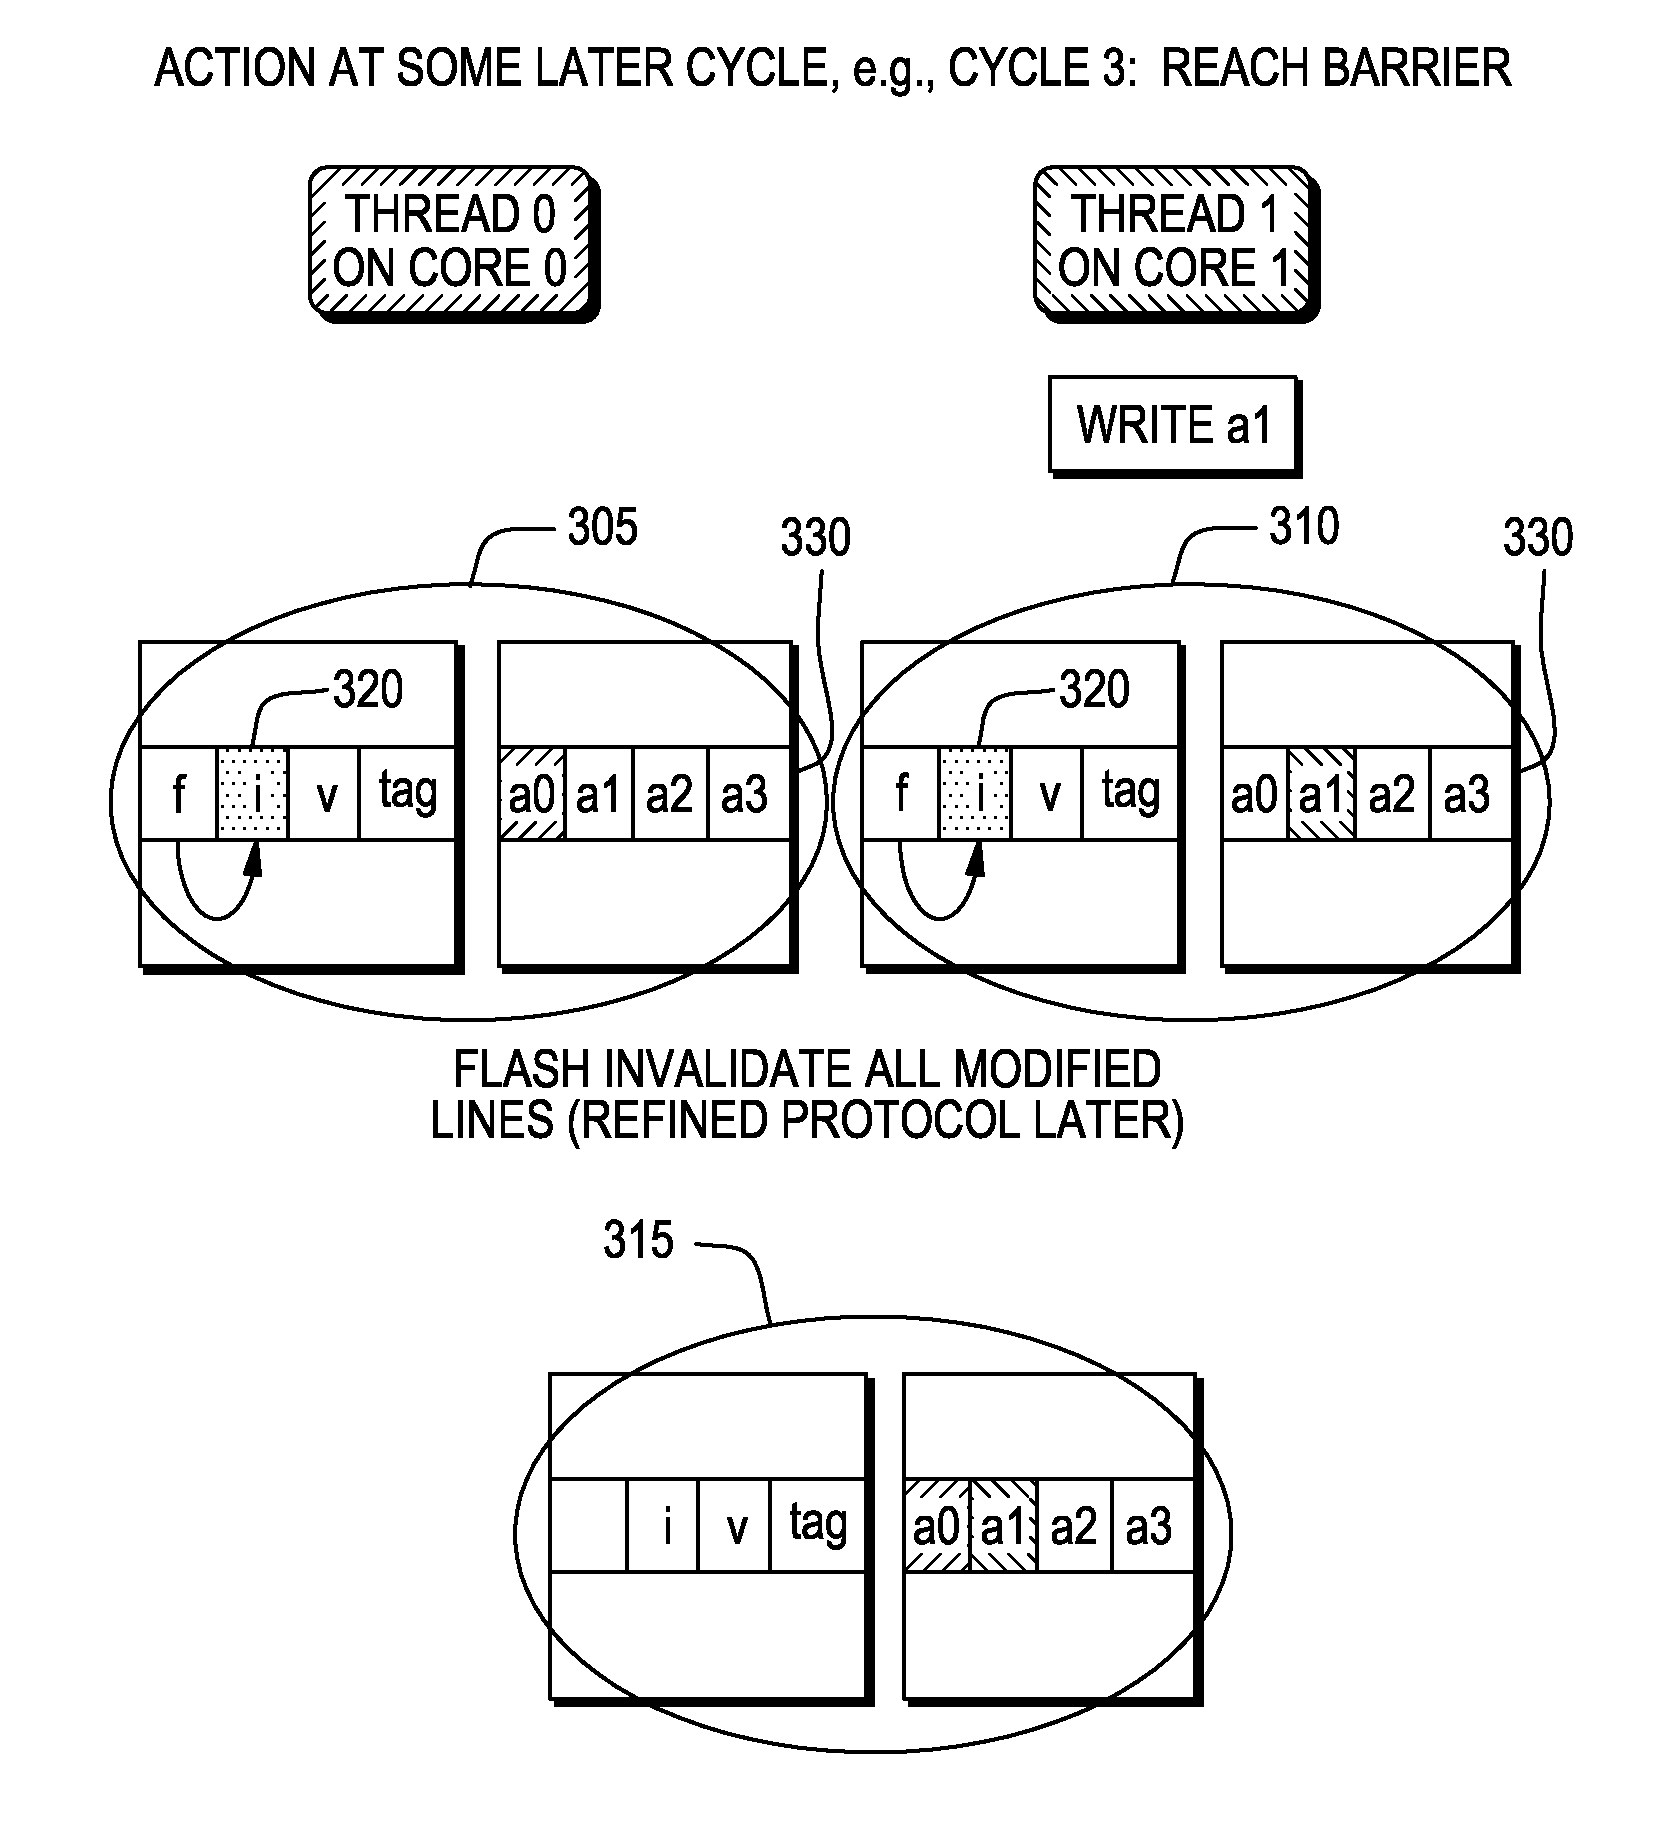 Write-through cache optimized for dependence-free parallel regions